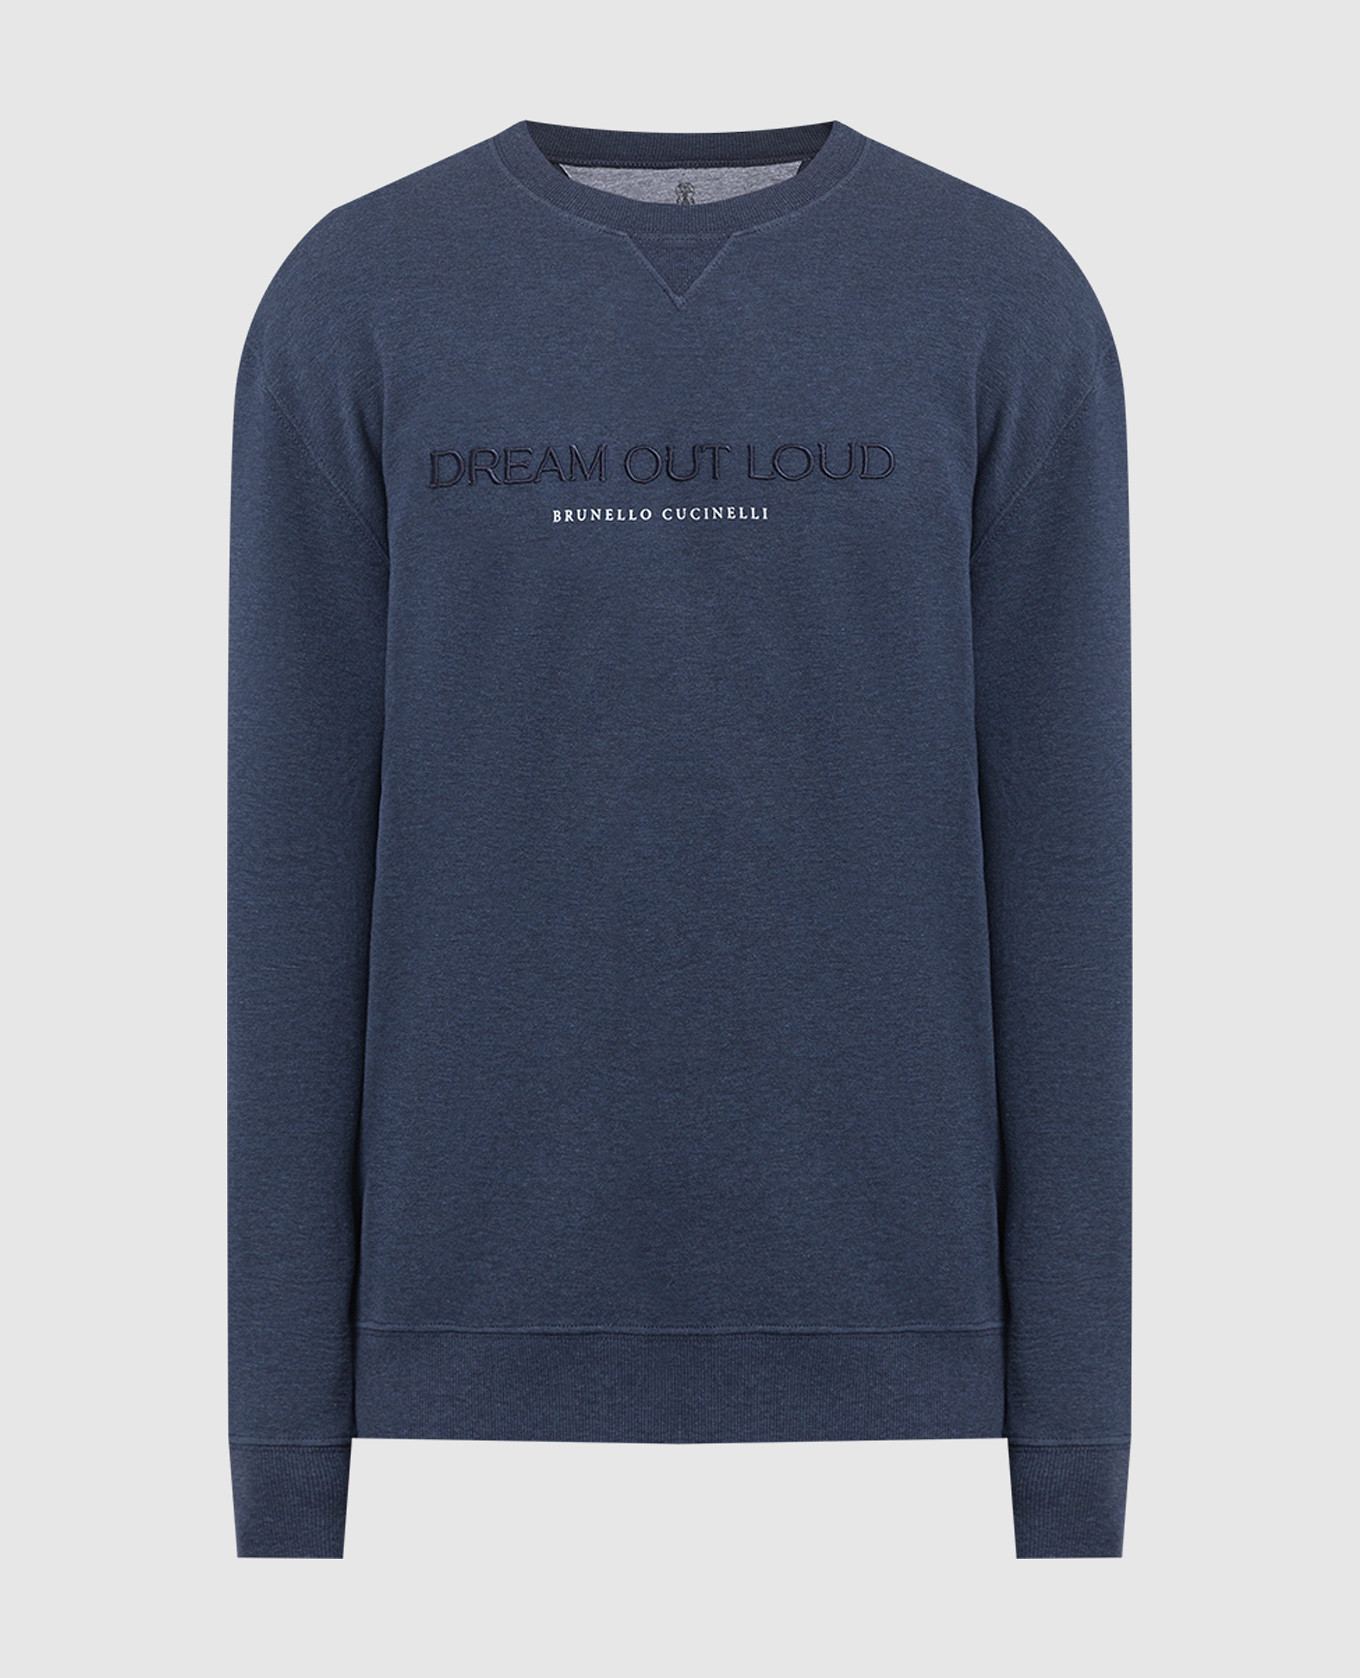 Blue sweatshirt with Dream out loud embroidery